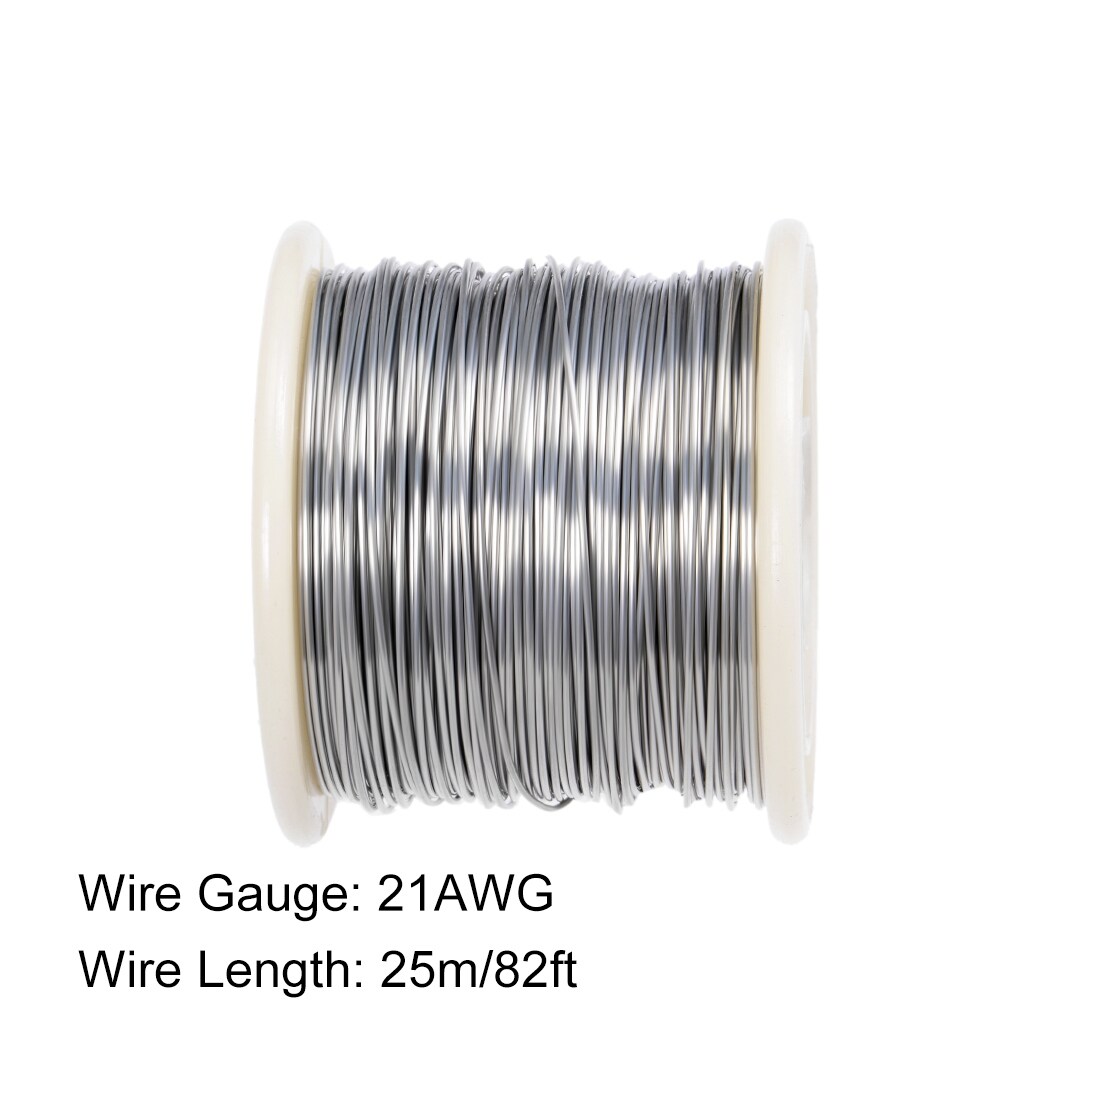 Unique Bargains 1mm 18AWG Heating Resistor Nichrome Wires for Heating Elements 16ft - 5m/16ft Length